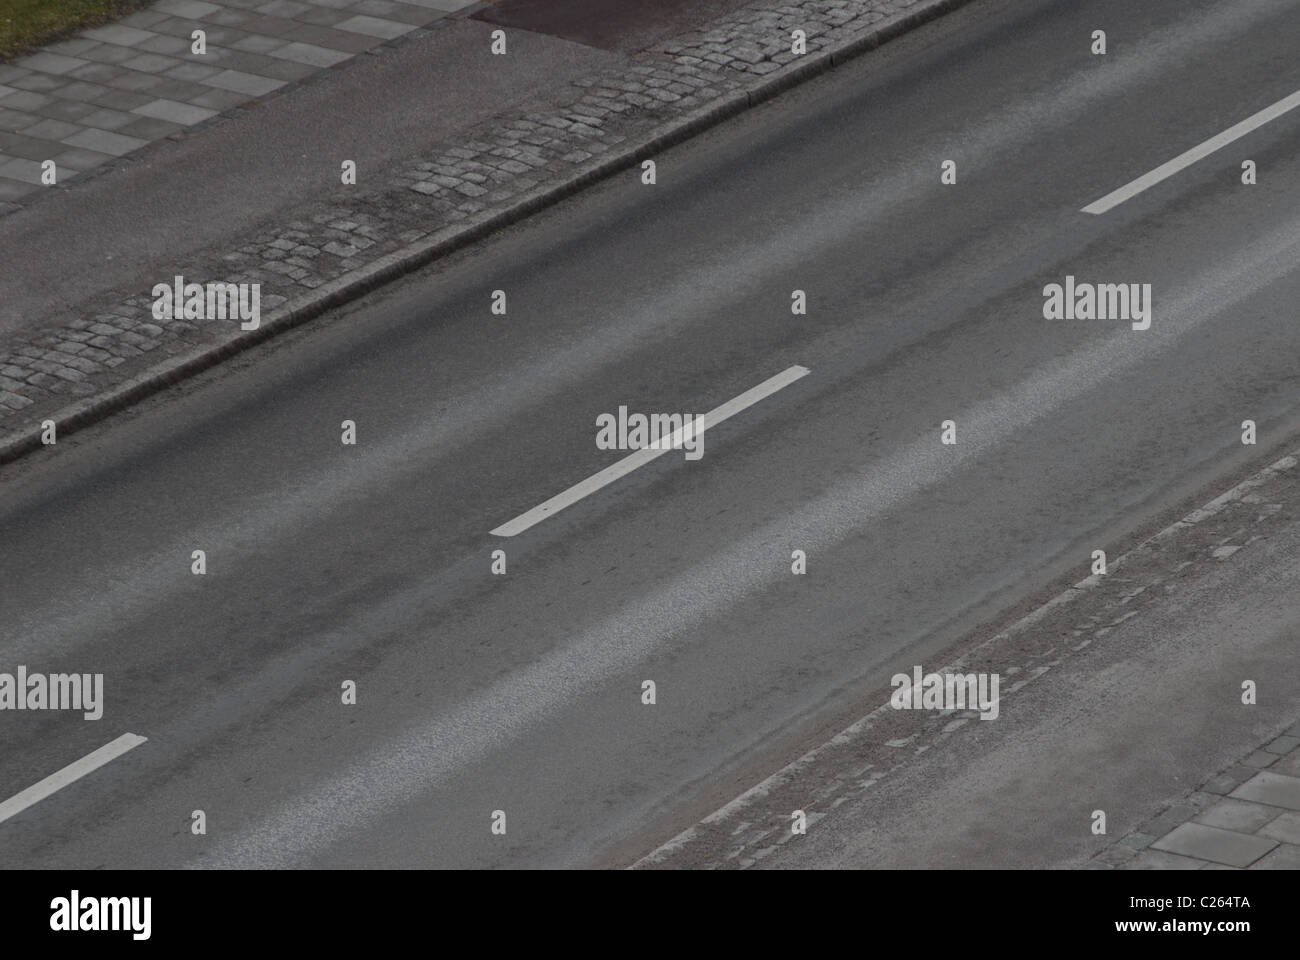 Diagonal road with white lines and various types of surfaces. Stock Photo